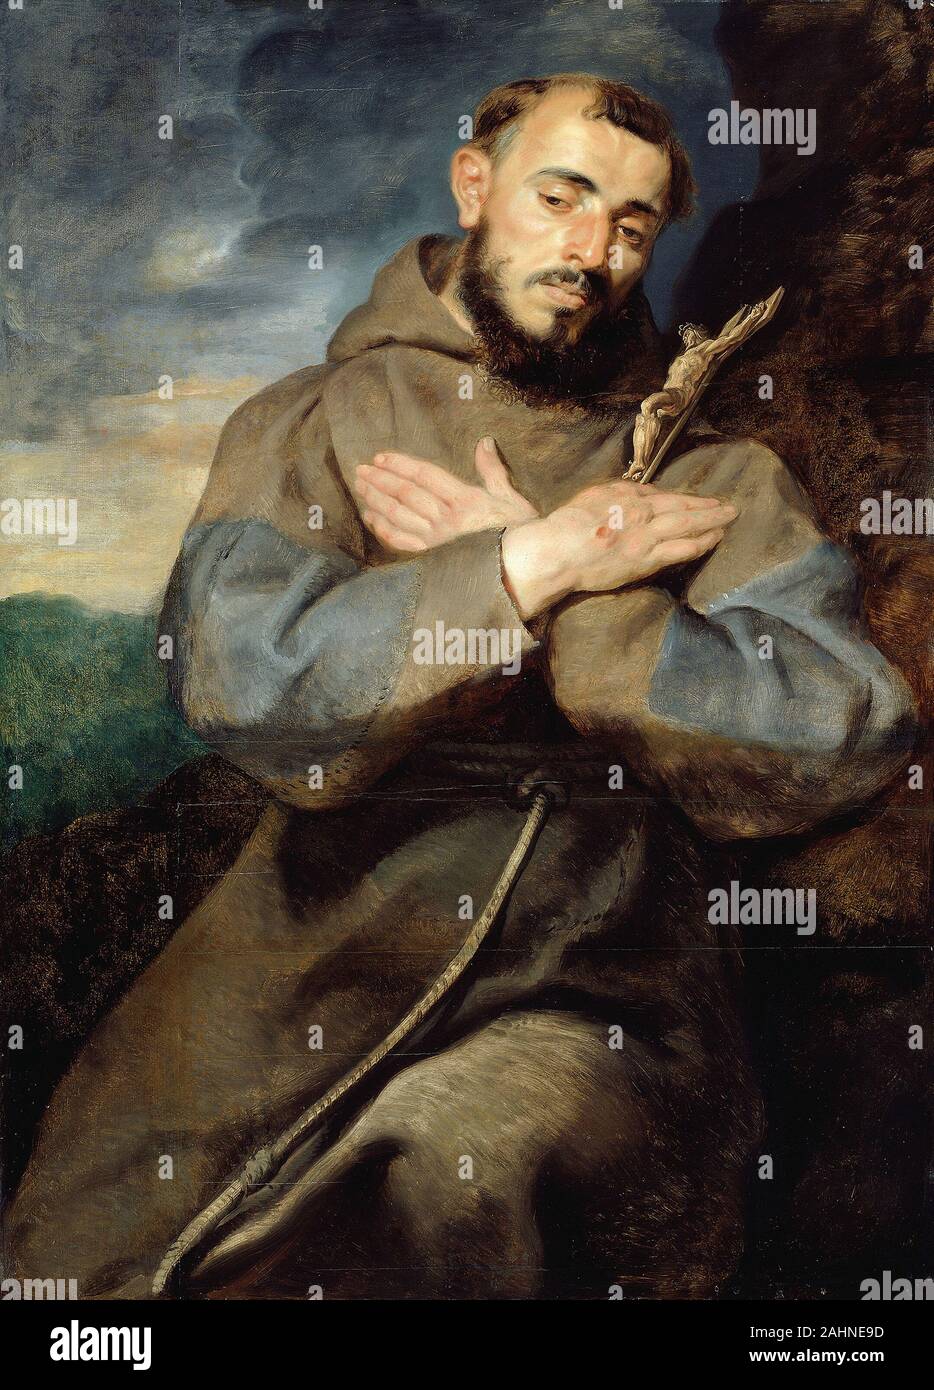 Peter Paul Rubens. Saint Francis. 1610–1620. Flanders. Oil on panel The preaching and teaching activities of the reformed religious orders, including the Franciscans, were important for the resurgence of the Catholic Church in the souther Netherlands following years of religious and political turmoil in the 16th century. Peter Paul Rubens painted numerous images of the founder of the Franciscans, Saint Francis of Assisi. They emphasize his ecstatic piety, most vividly represented in the episode of his stigmatization, when he received the marks of Christ’s Passion. In this simpler, portraitlike Stock Photo